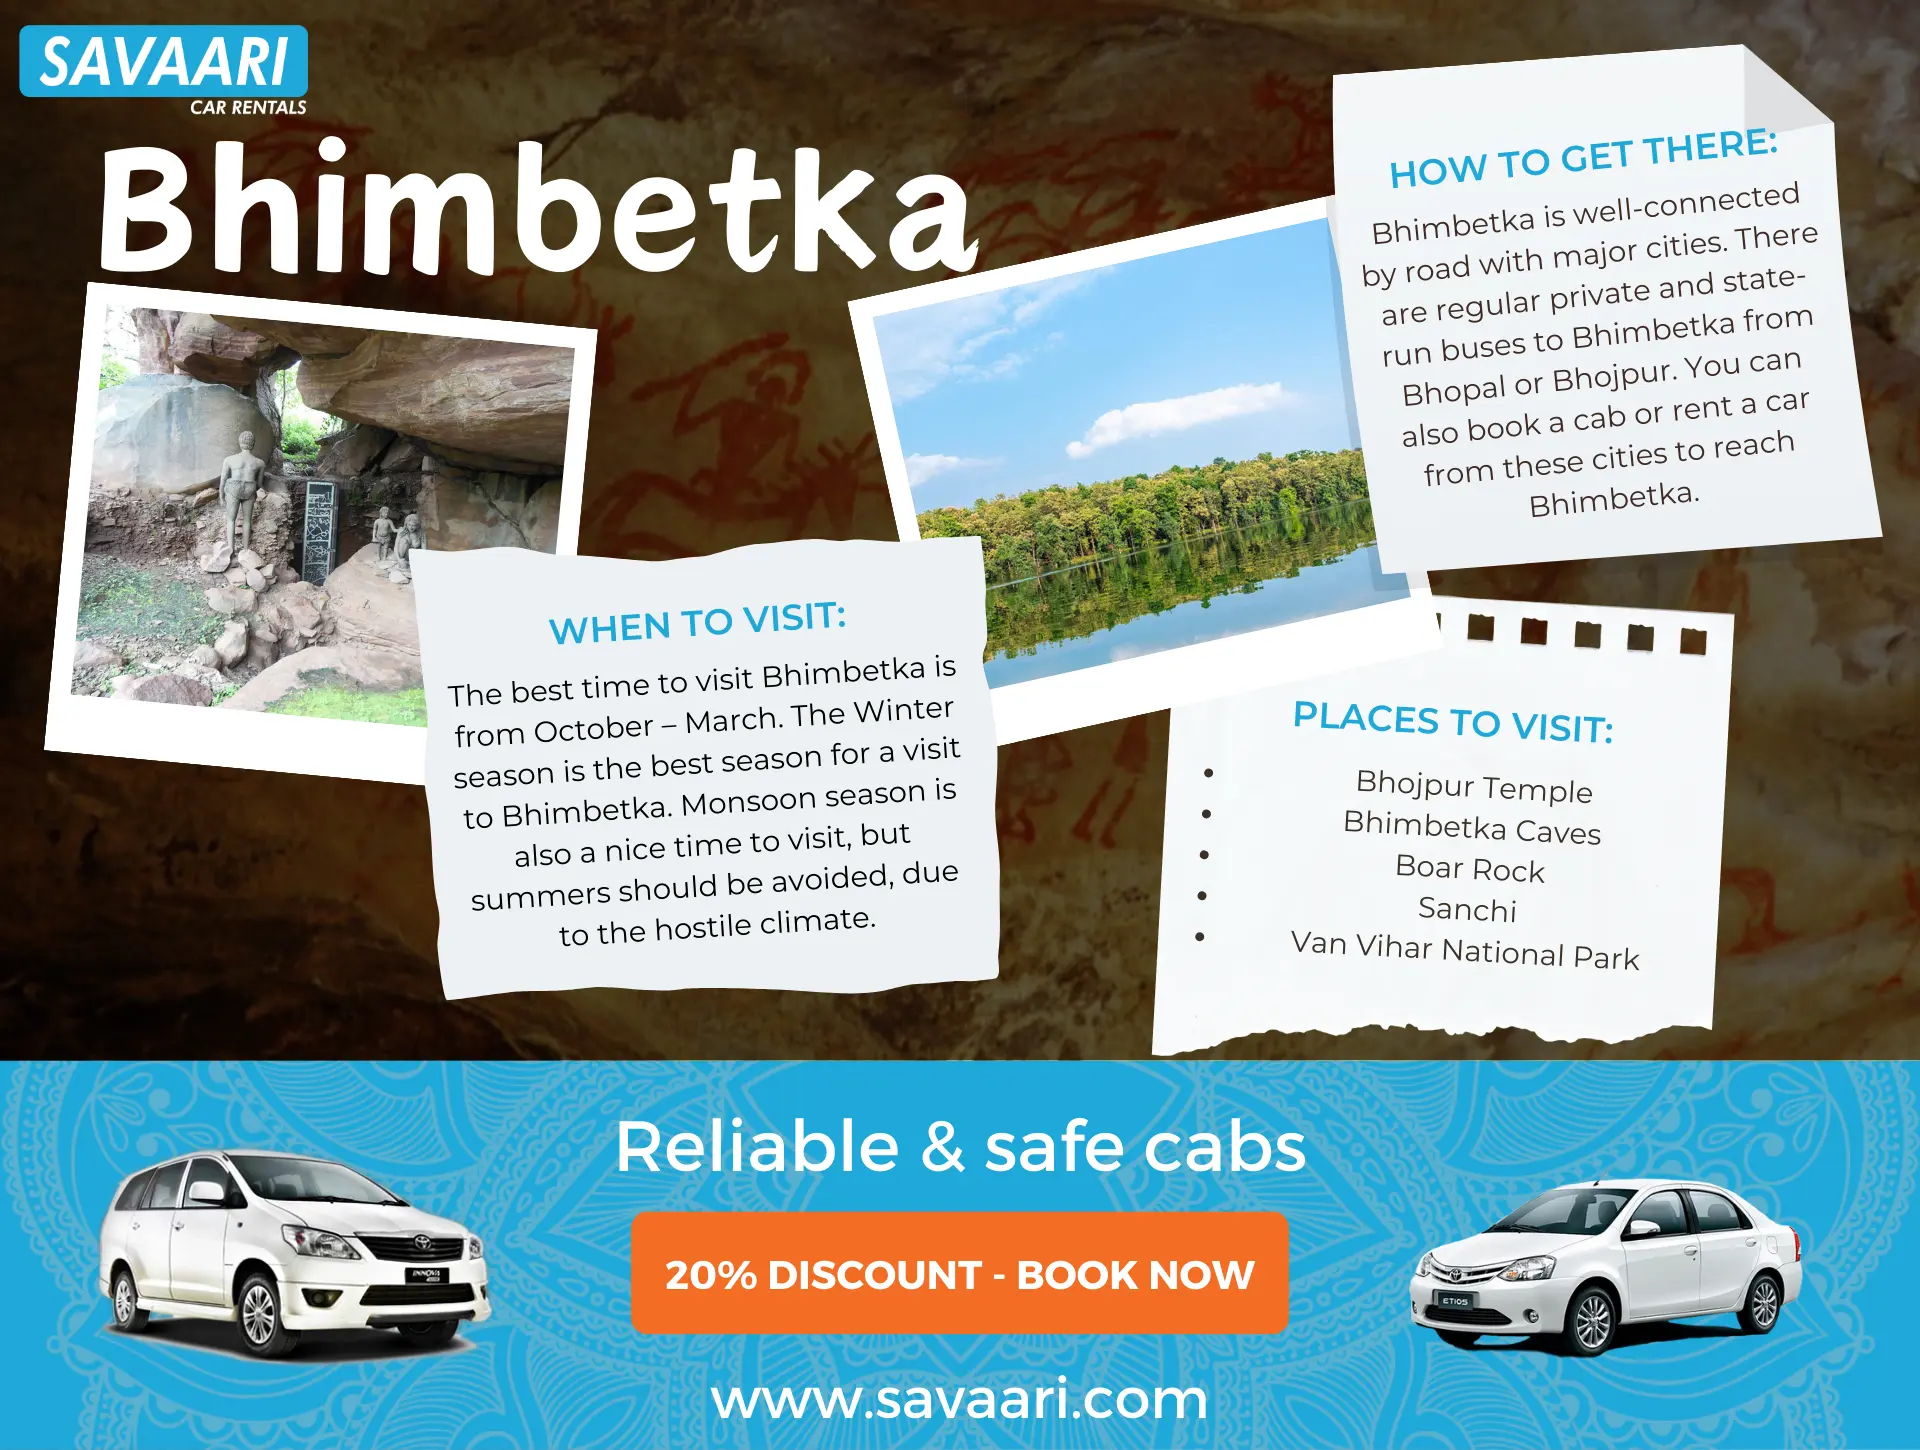 Things to do in Bhimbetka